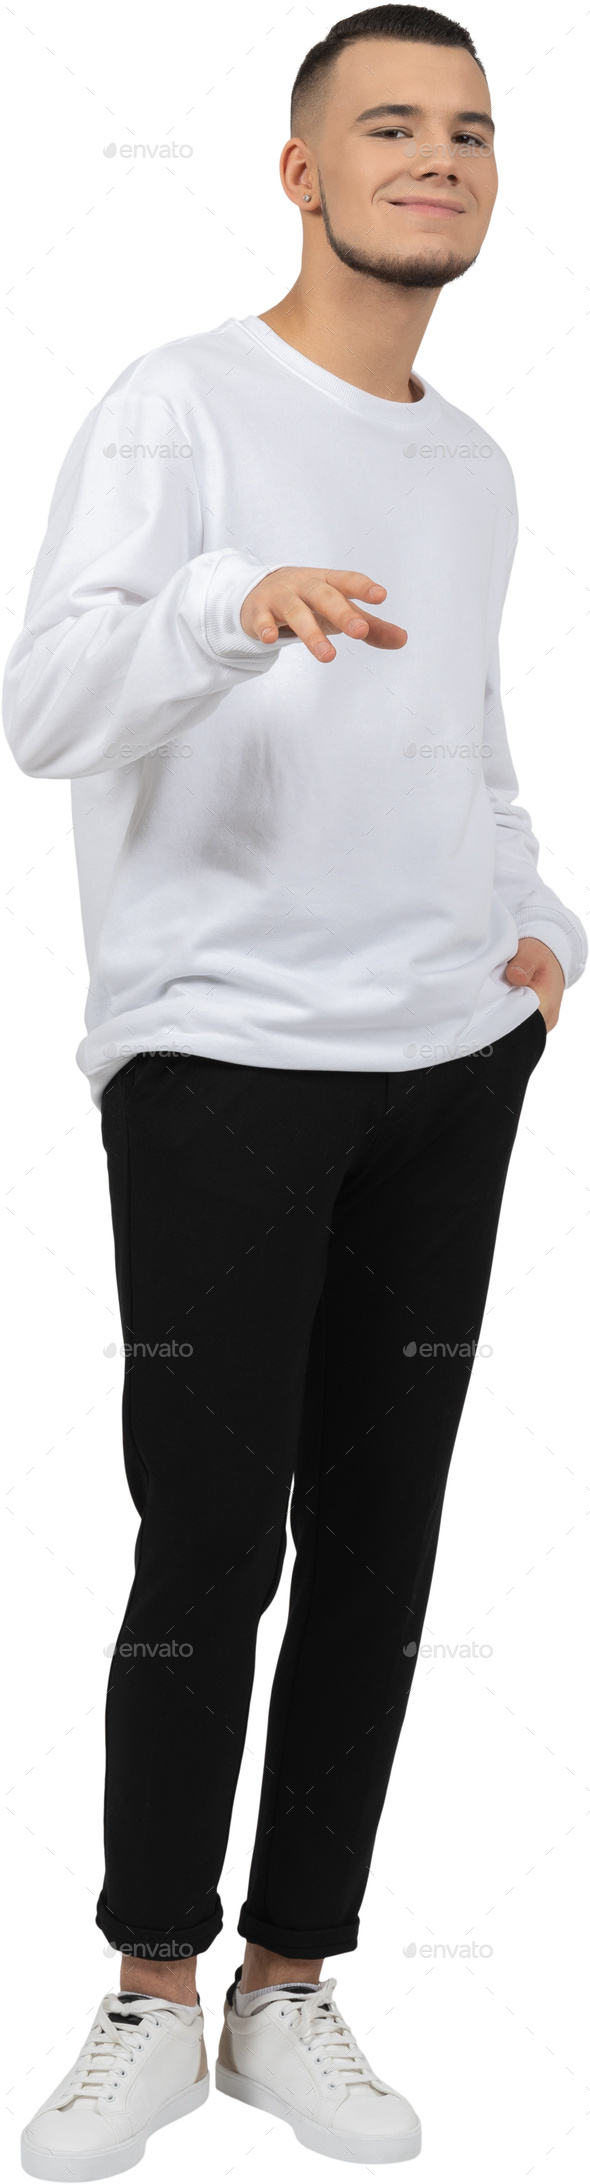 a woman in a white sweatshirt and black pants